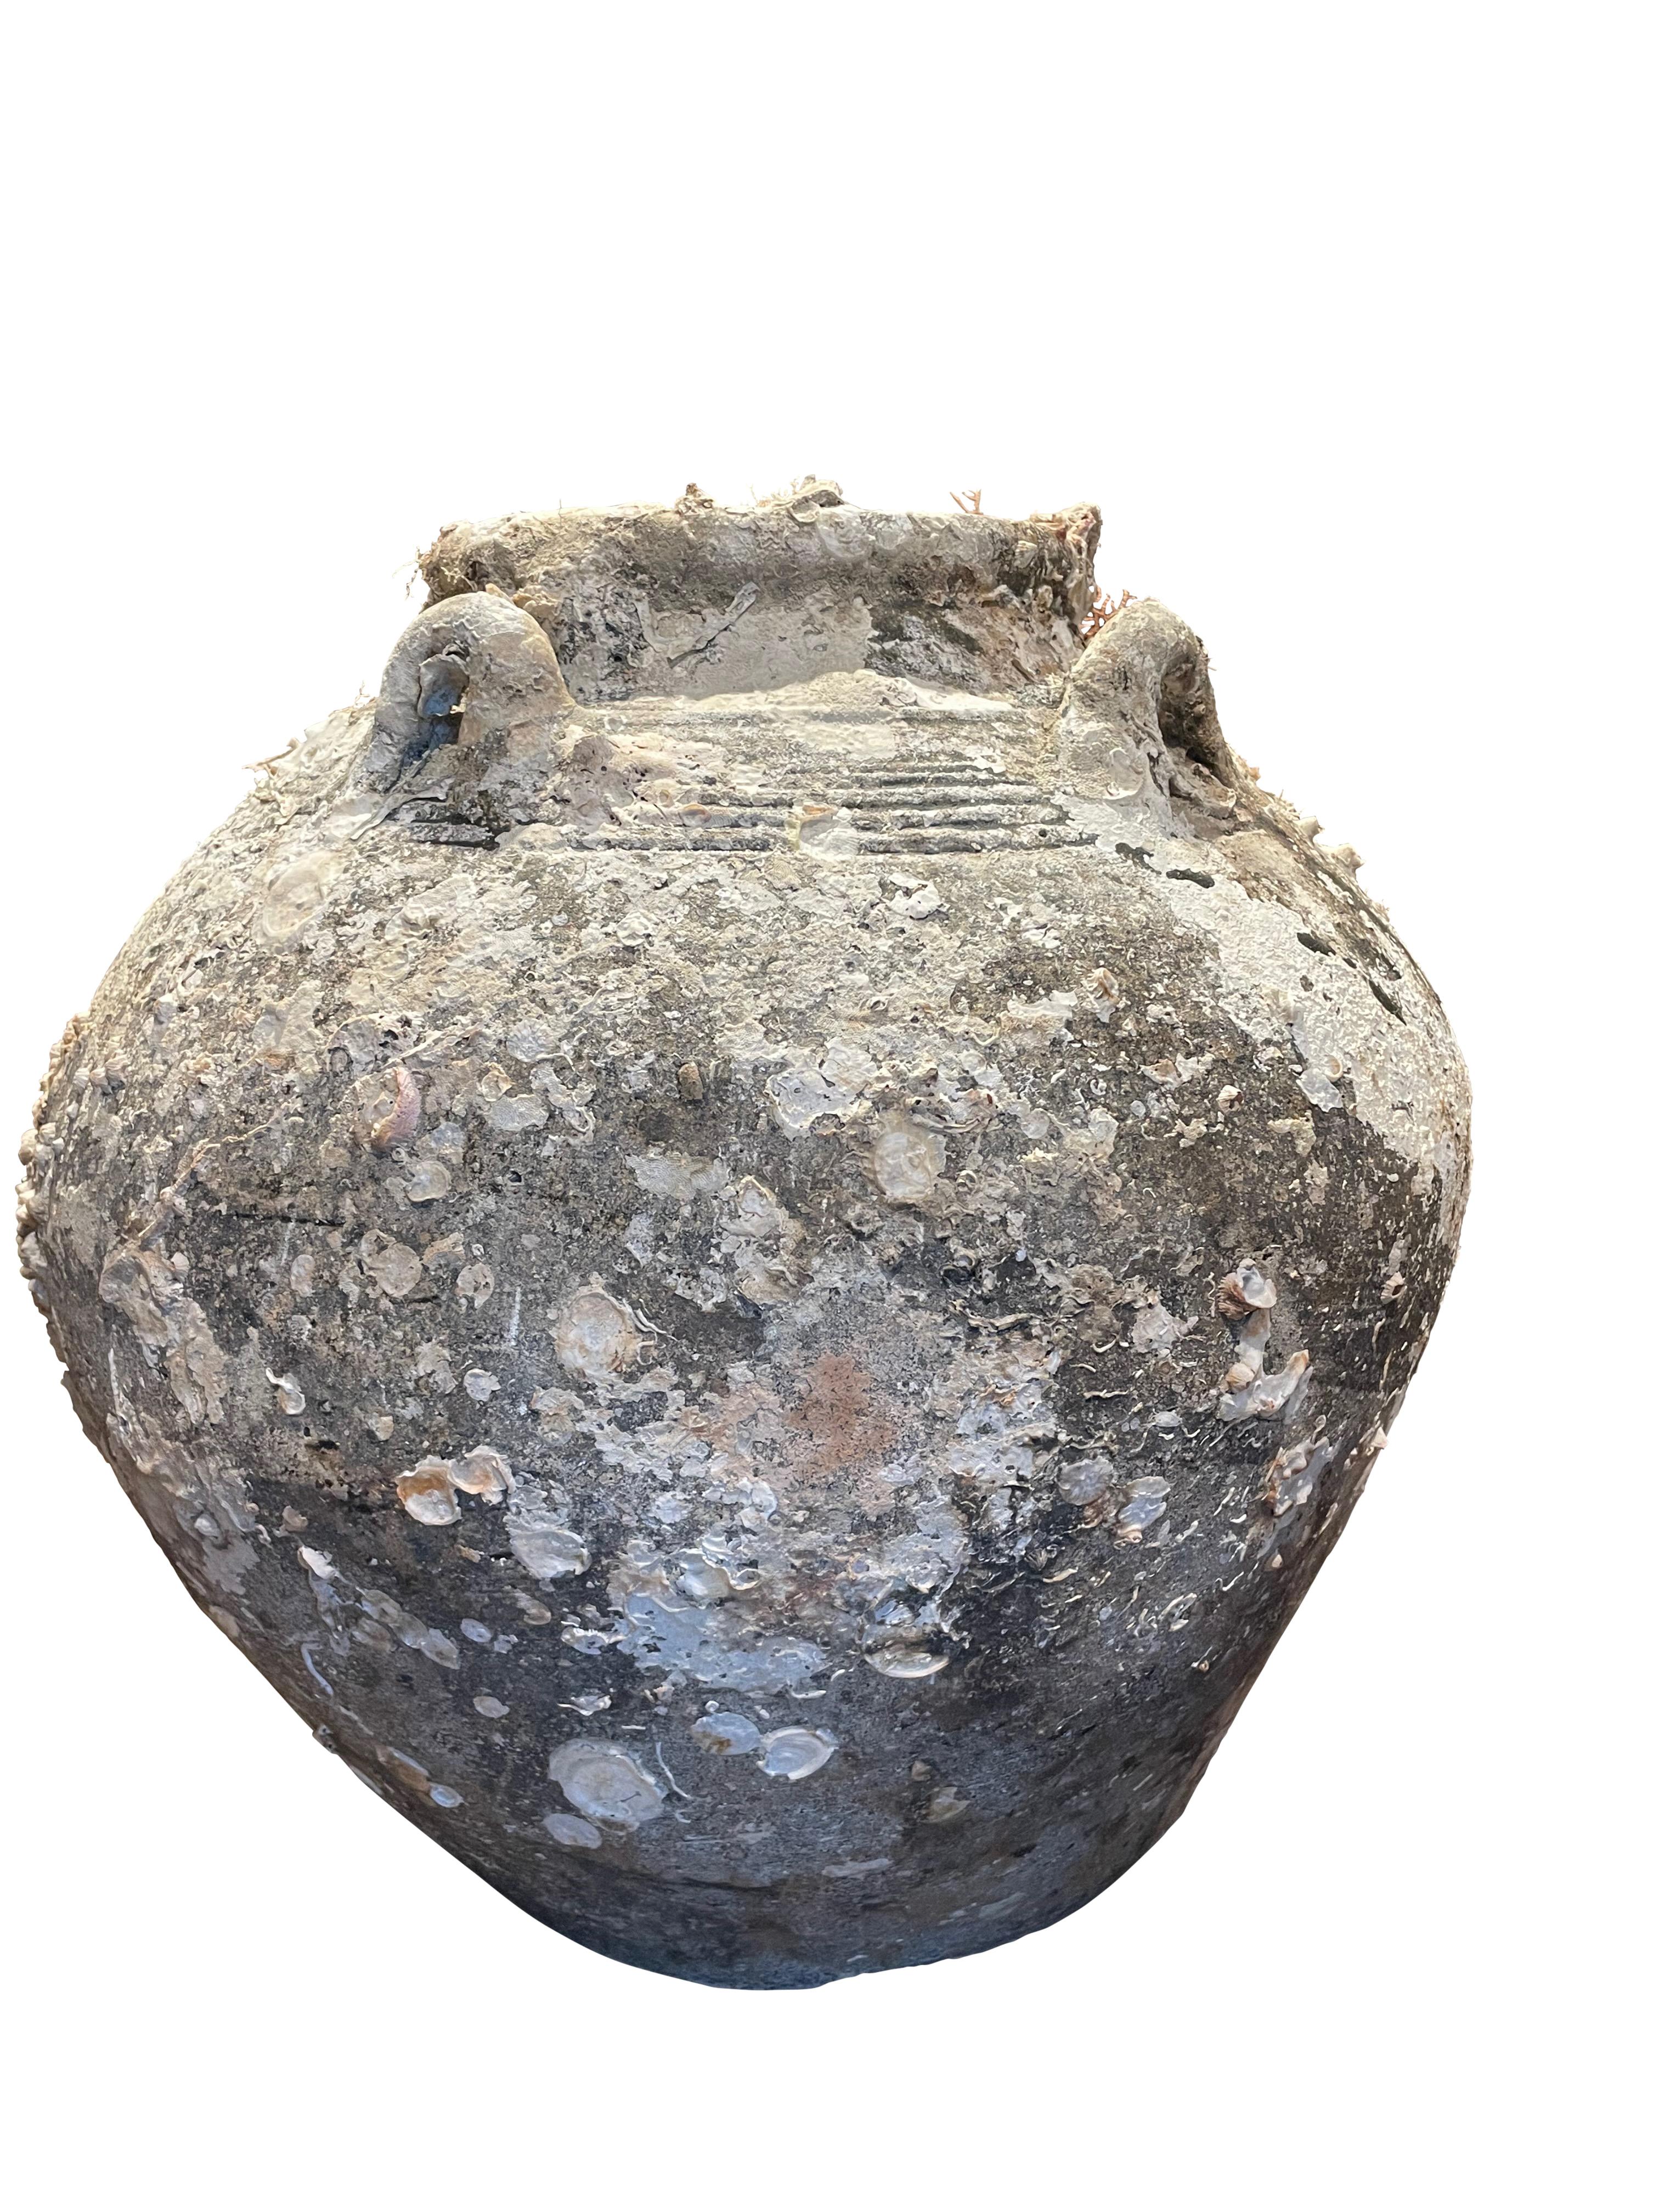 16th century Cambodian vessel found from shipwreck of the coast of Cambodia.
Beautiful natural shells and barnacles from being under water
for hundreds of years.
Museum quality.
ARRIVING MARCH